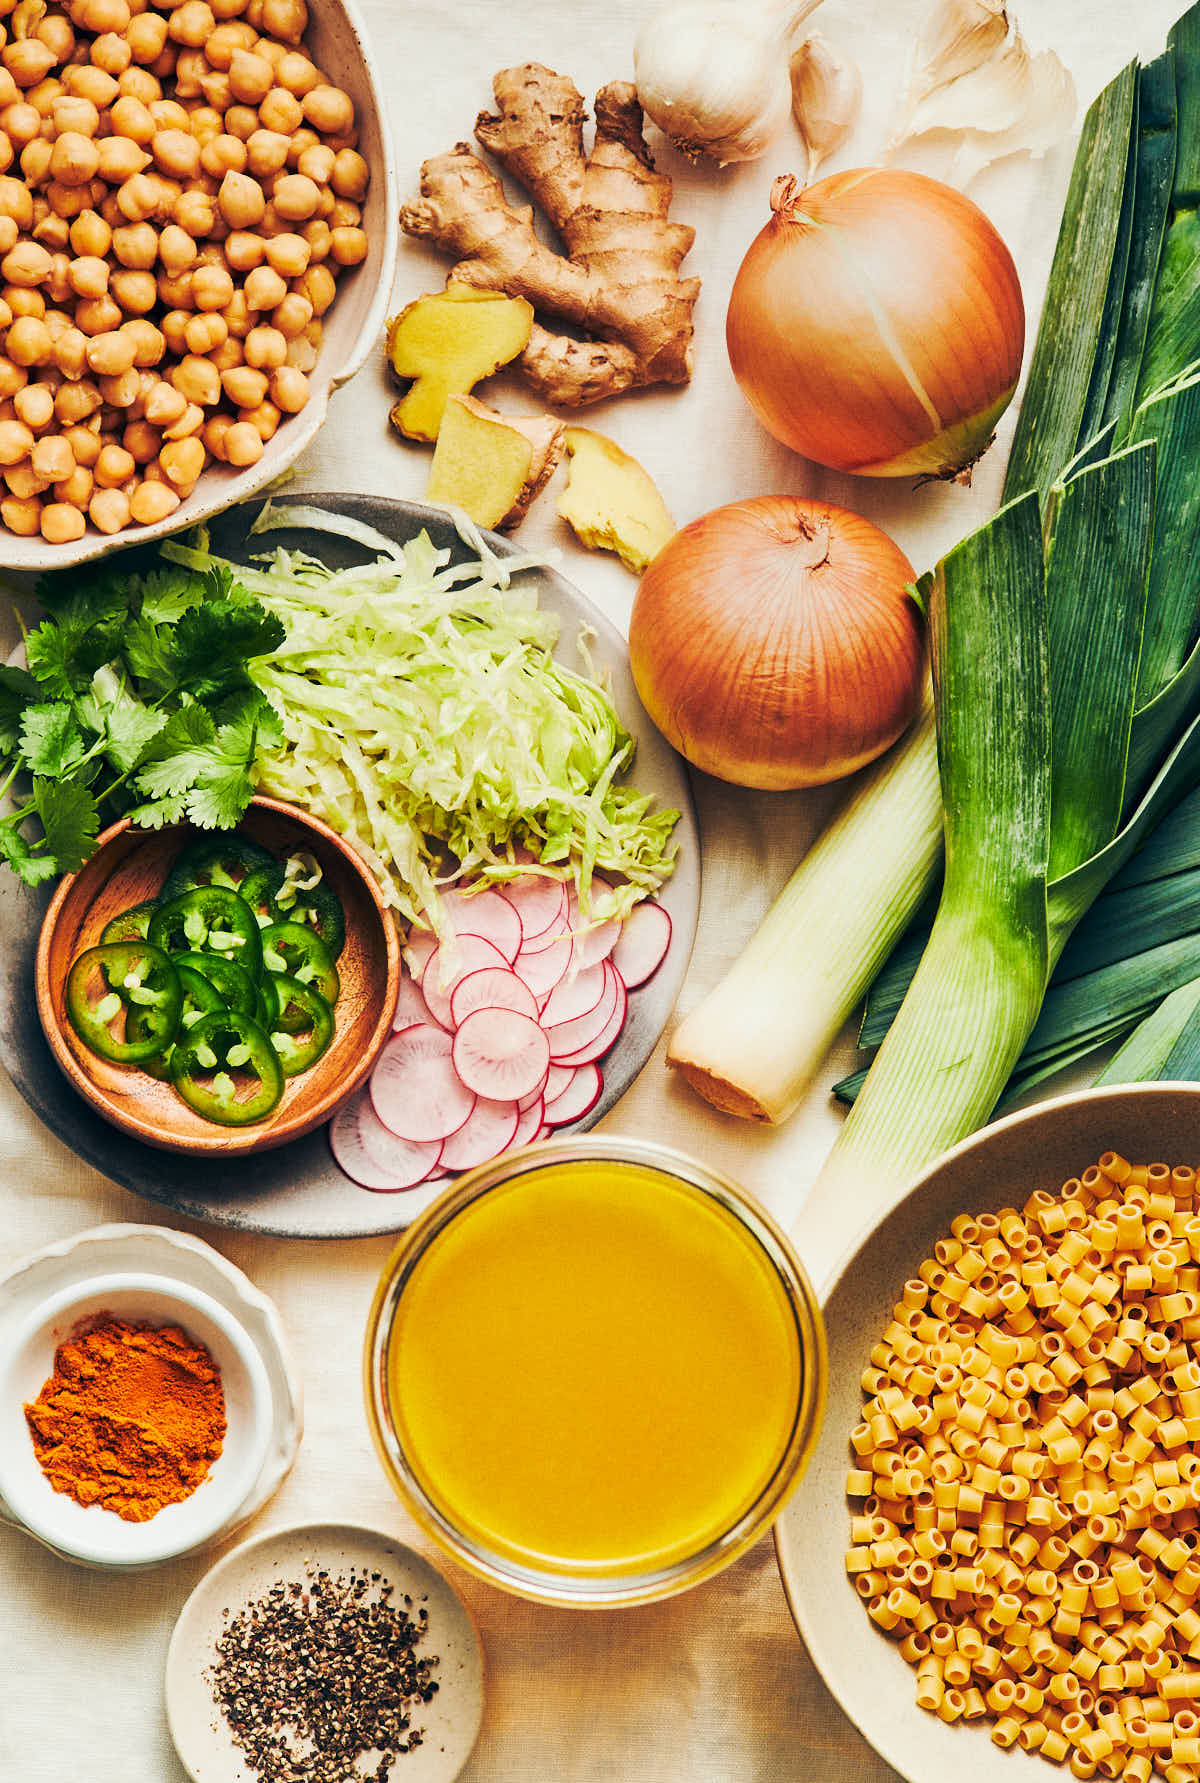 The ingredients to make vegan golden chickpea noodle soup: leeks, yellow onions, vegetable broth, chickpeas, pasta, ginger, turmeric, and black pepper